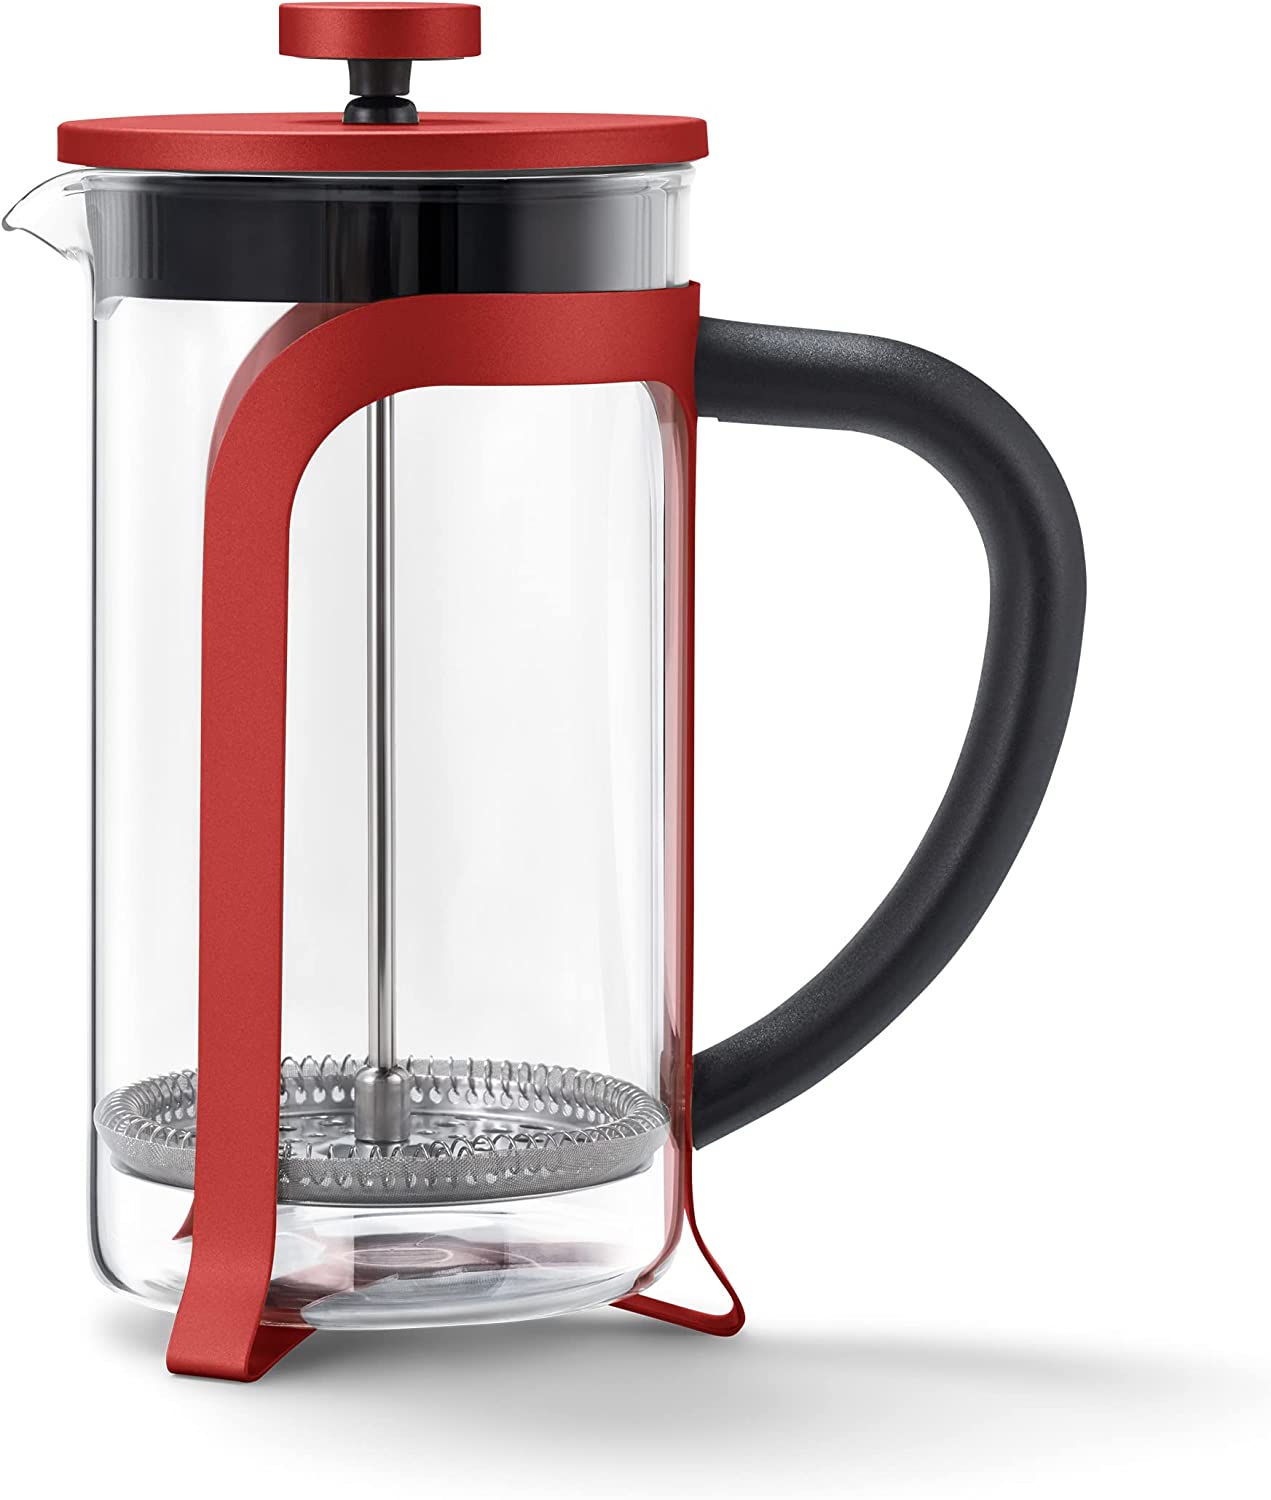 Tchibo Strainer Stamp Jug for Manual Coffee Preparation, French Press with Heat-Resistant Borosilicate Glass, Dishwasher Safe, 800 ml capacity for Approx. 6 cups, Stainless Steel, Red